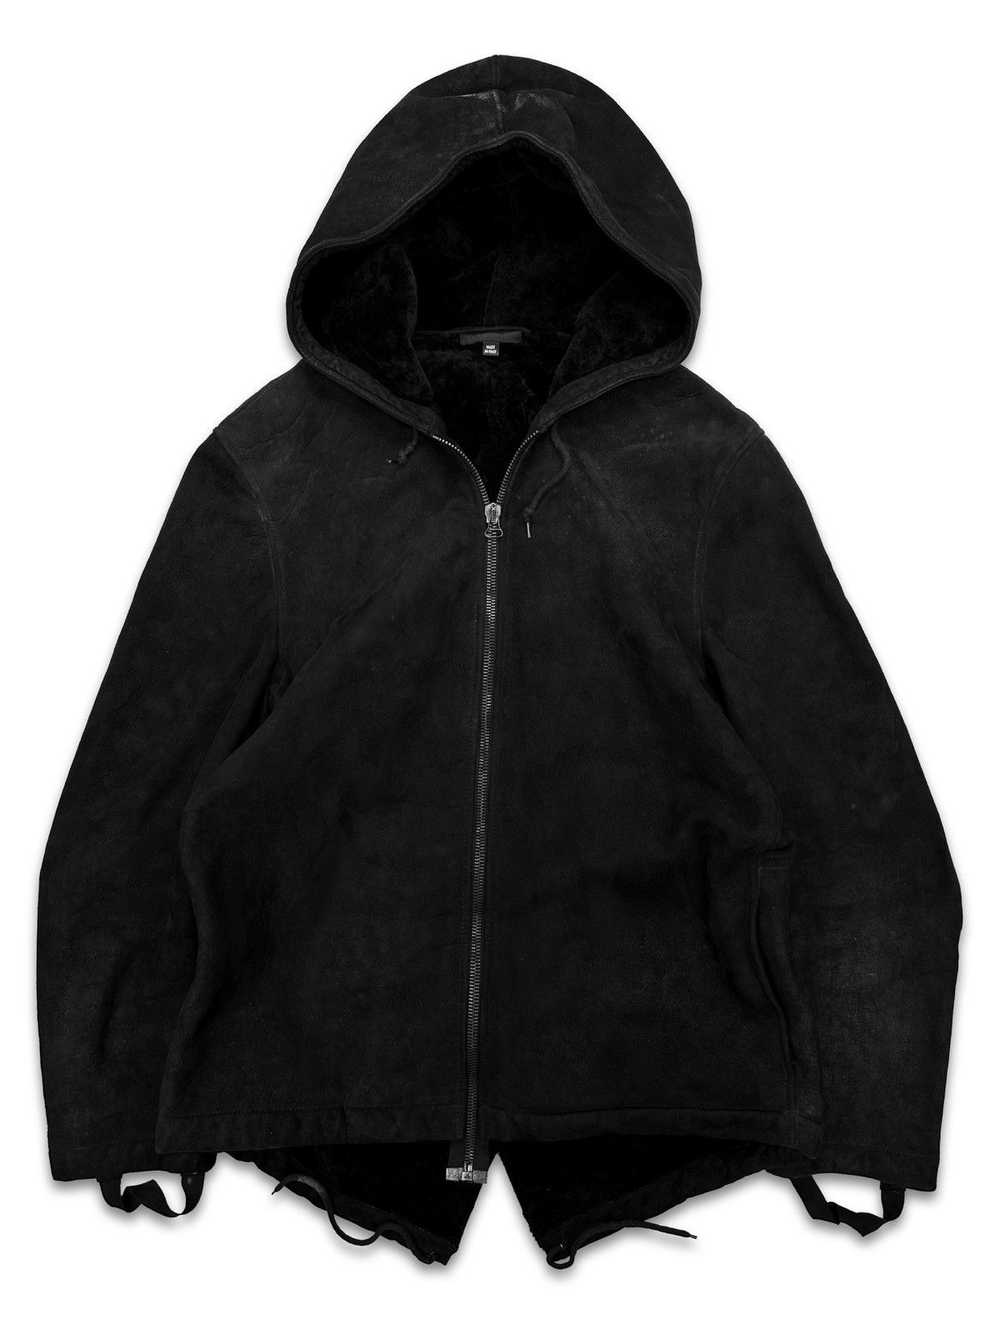 Helmut Lang AW04 Helmut Lang Shearling Leather He… - image 1